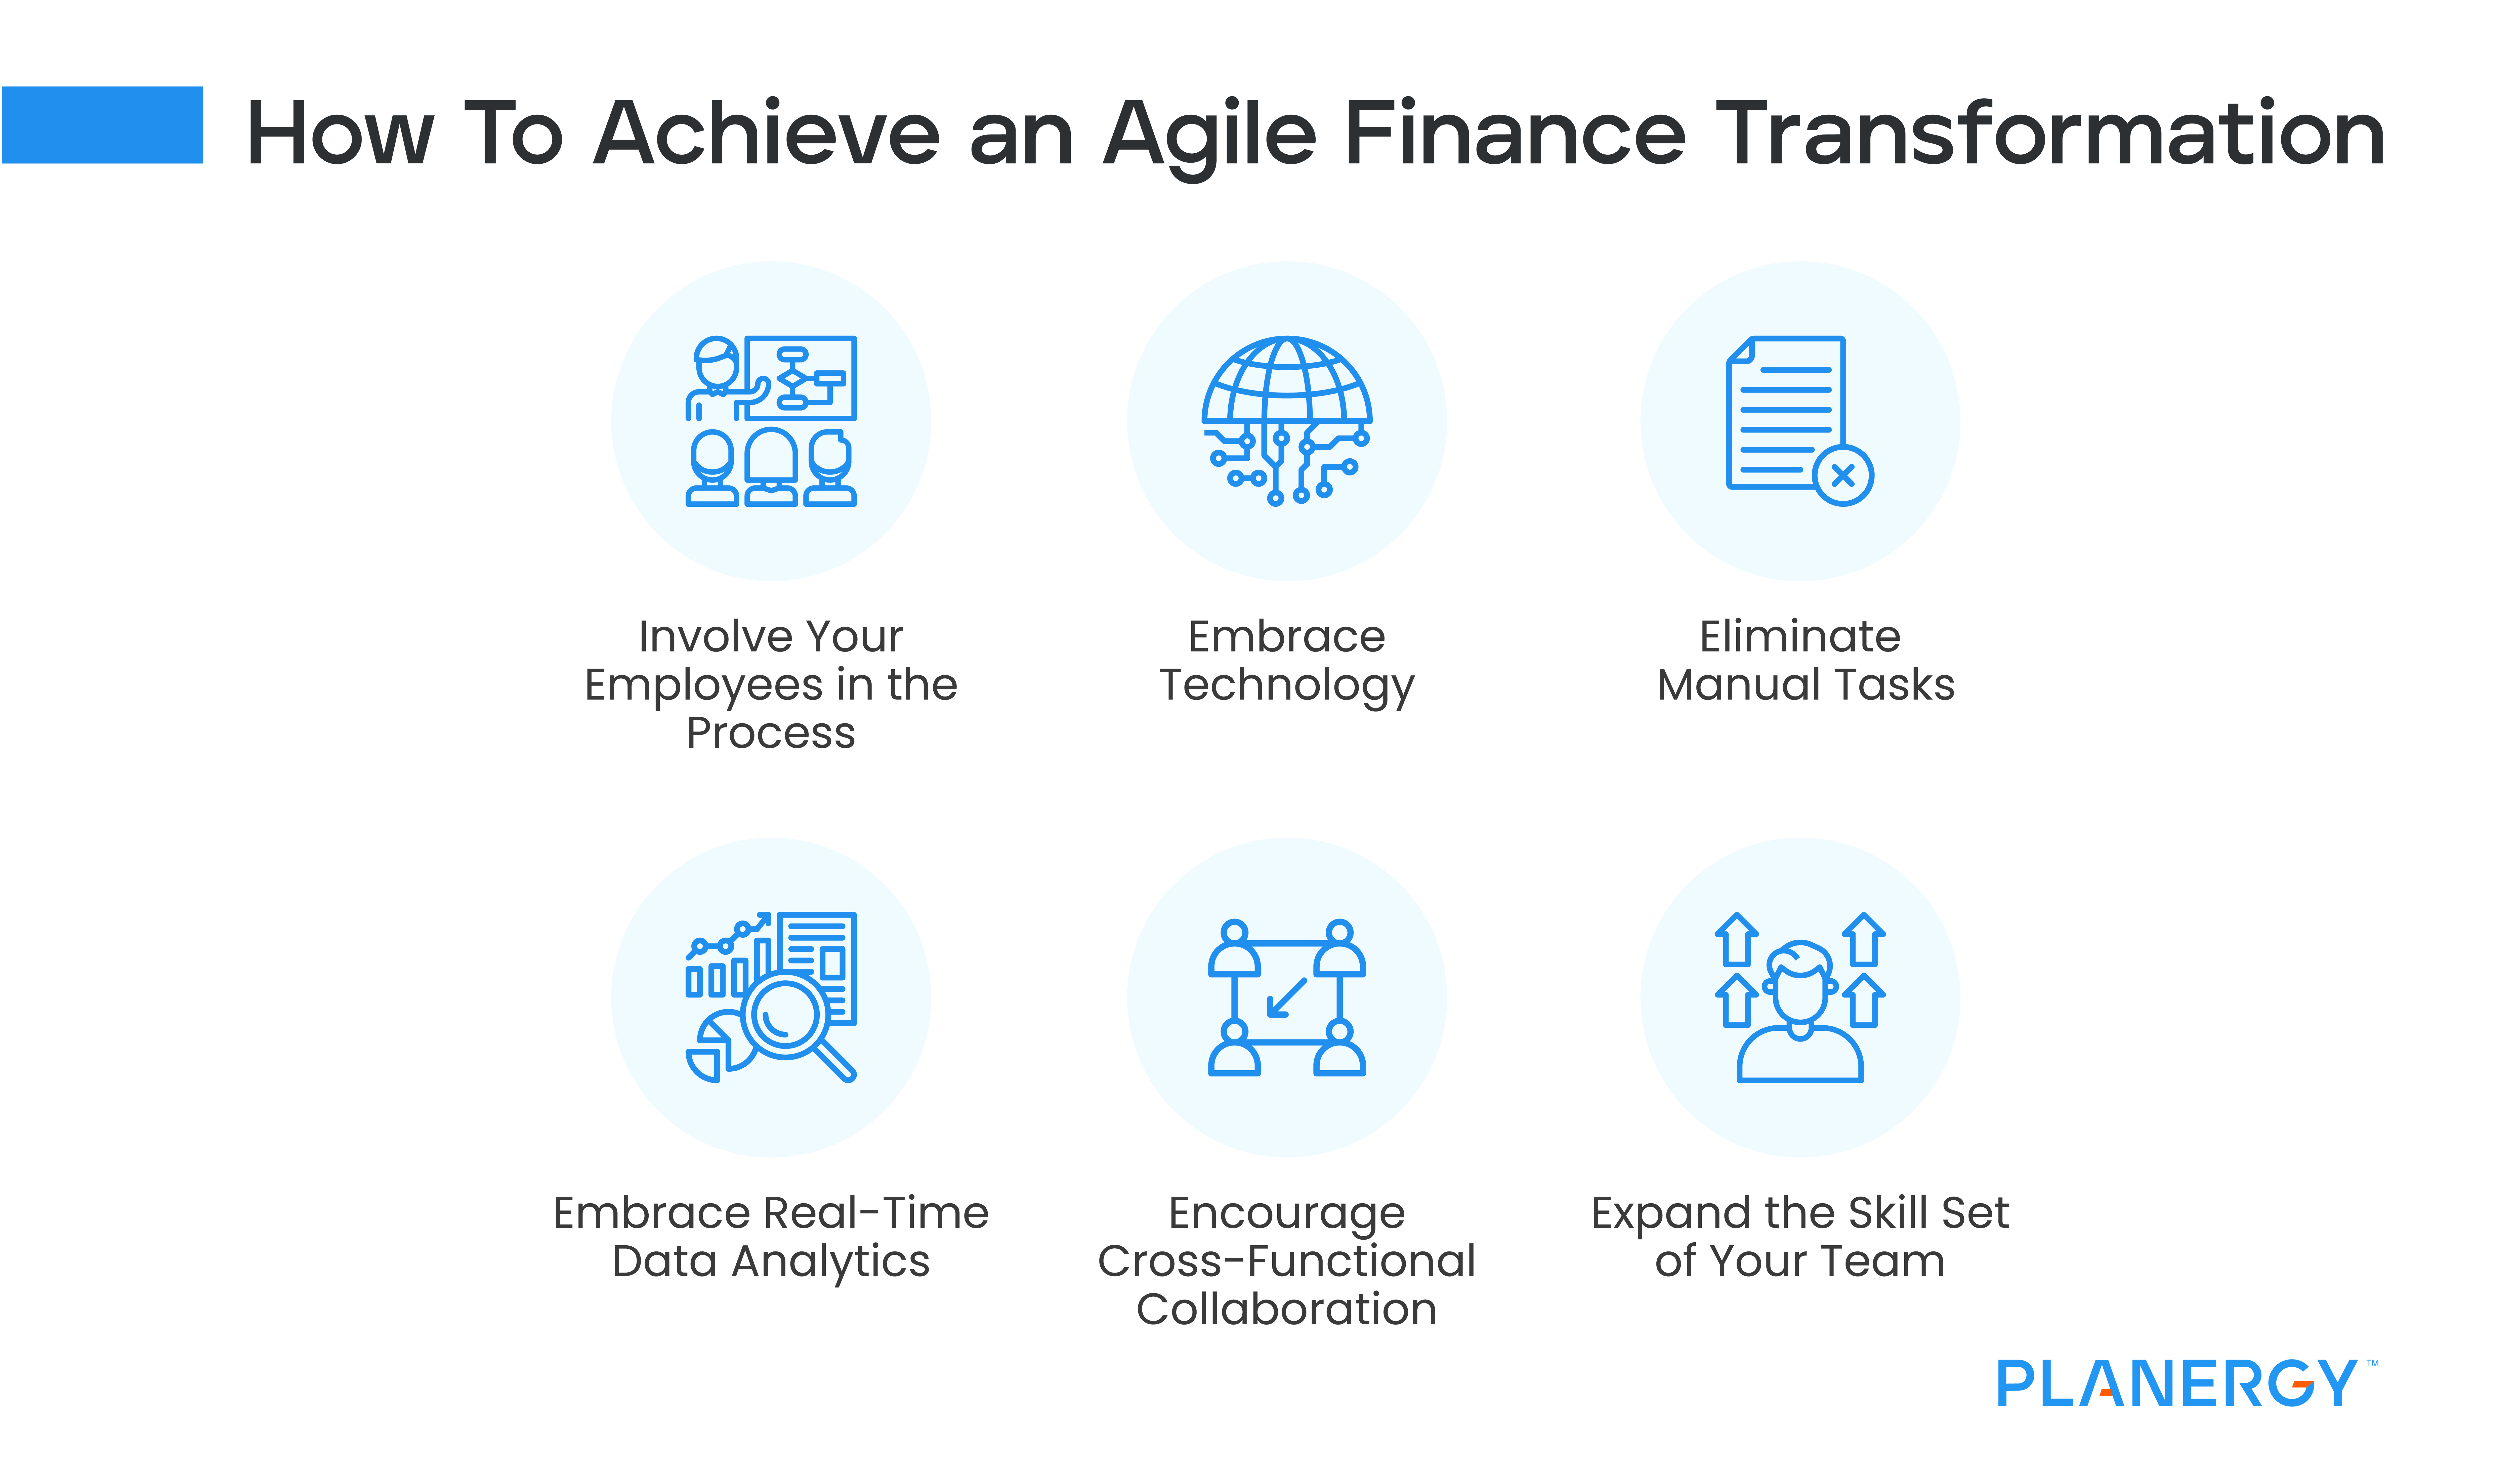 How to Achieve an Agile Finance Transformation